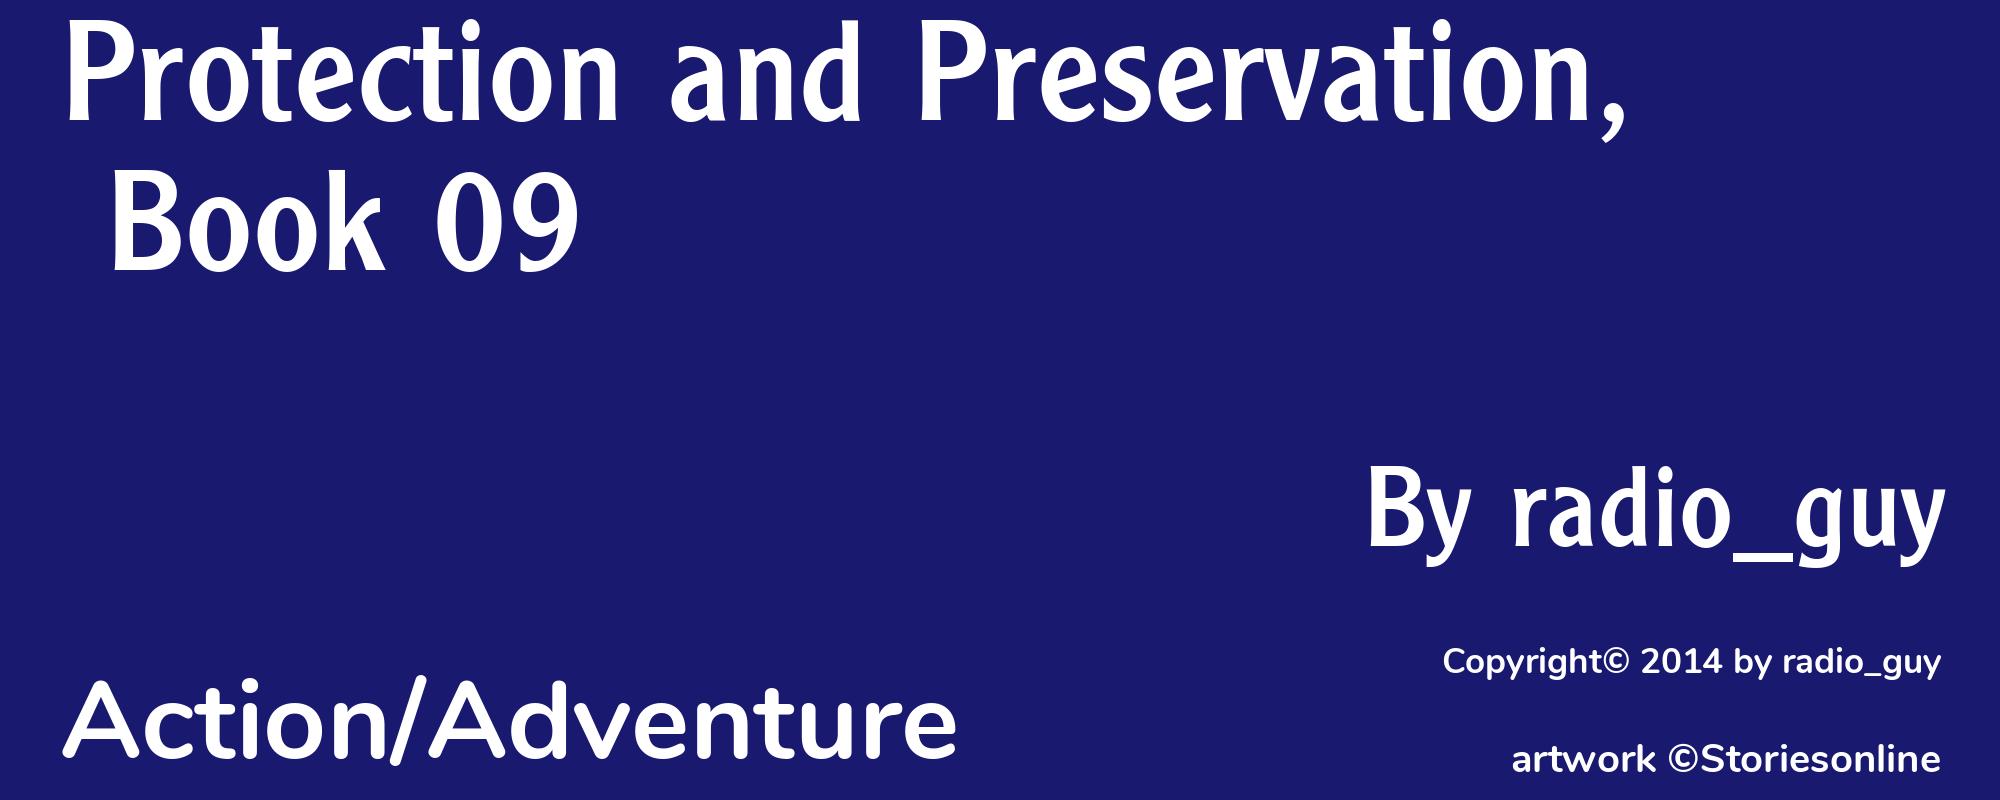 Protection and Preservation, Book 09 - Cover